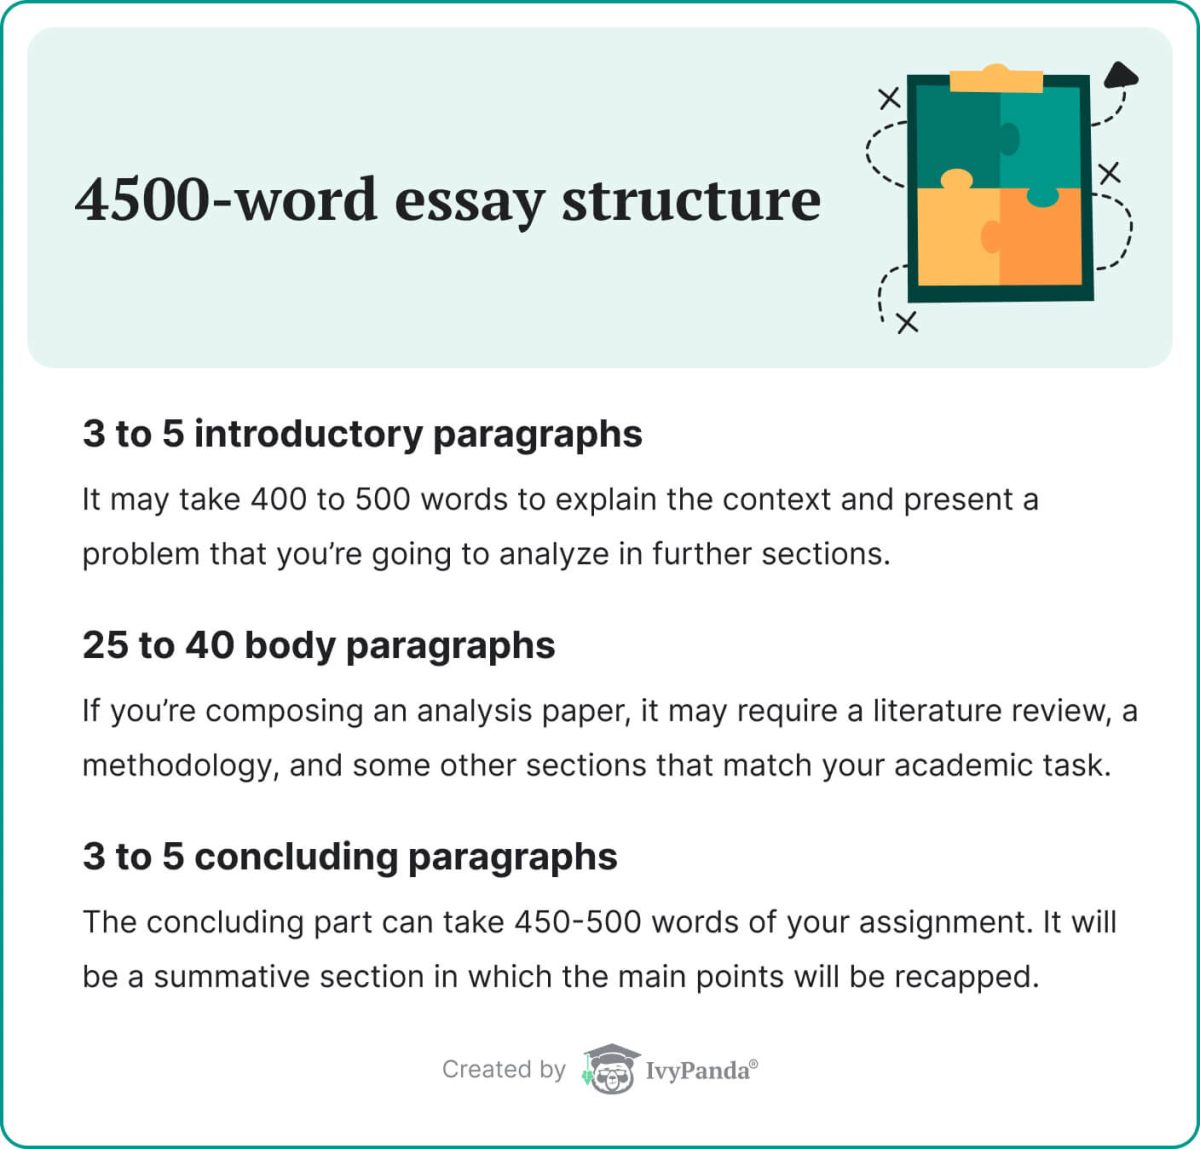 The picture lists the structural components of a 4500-word essay.